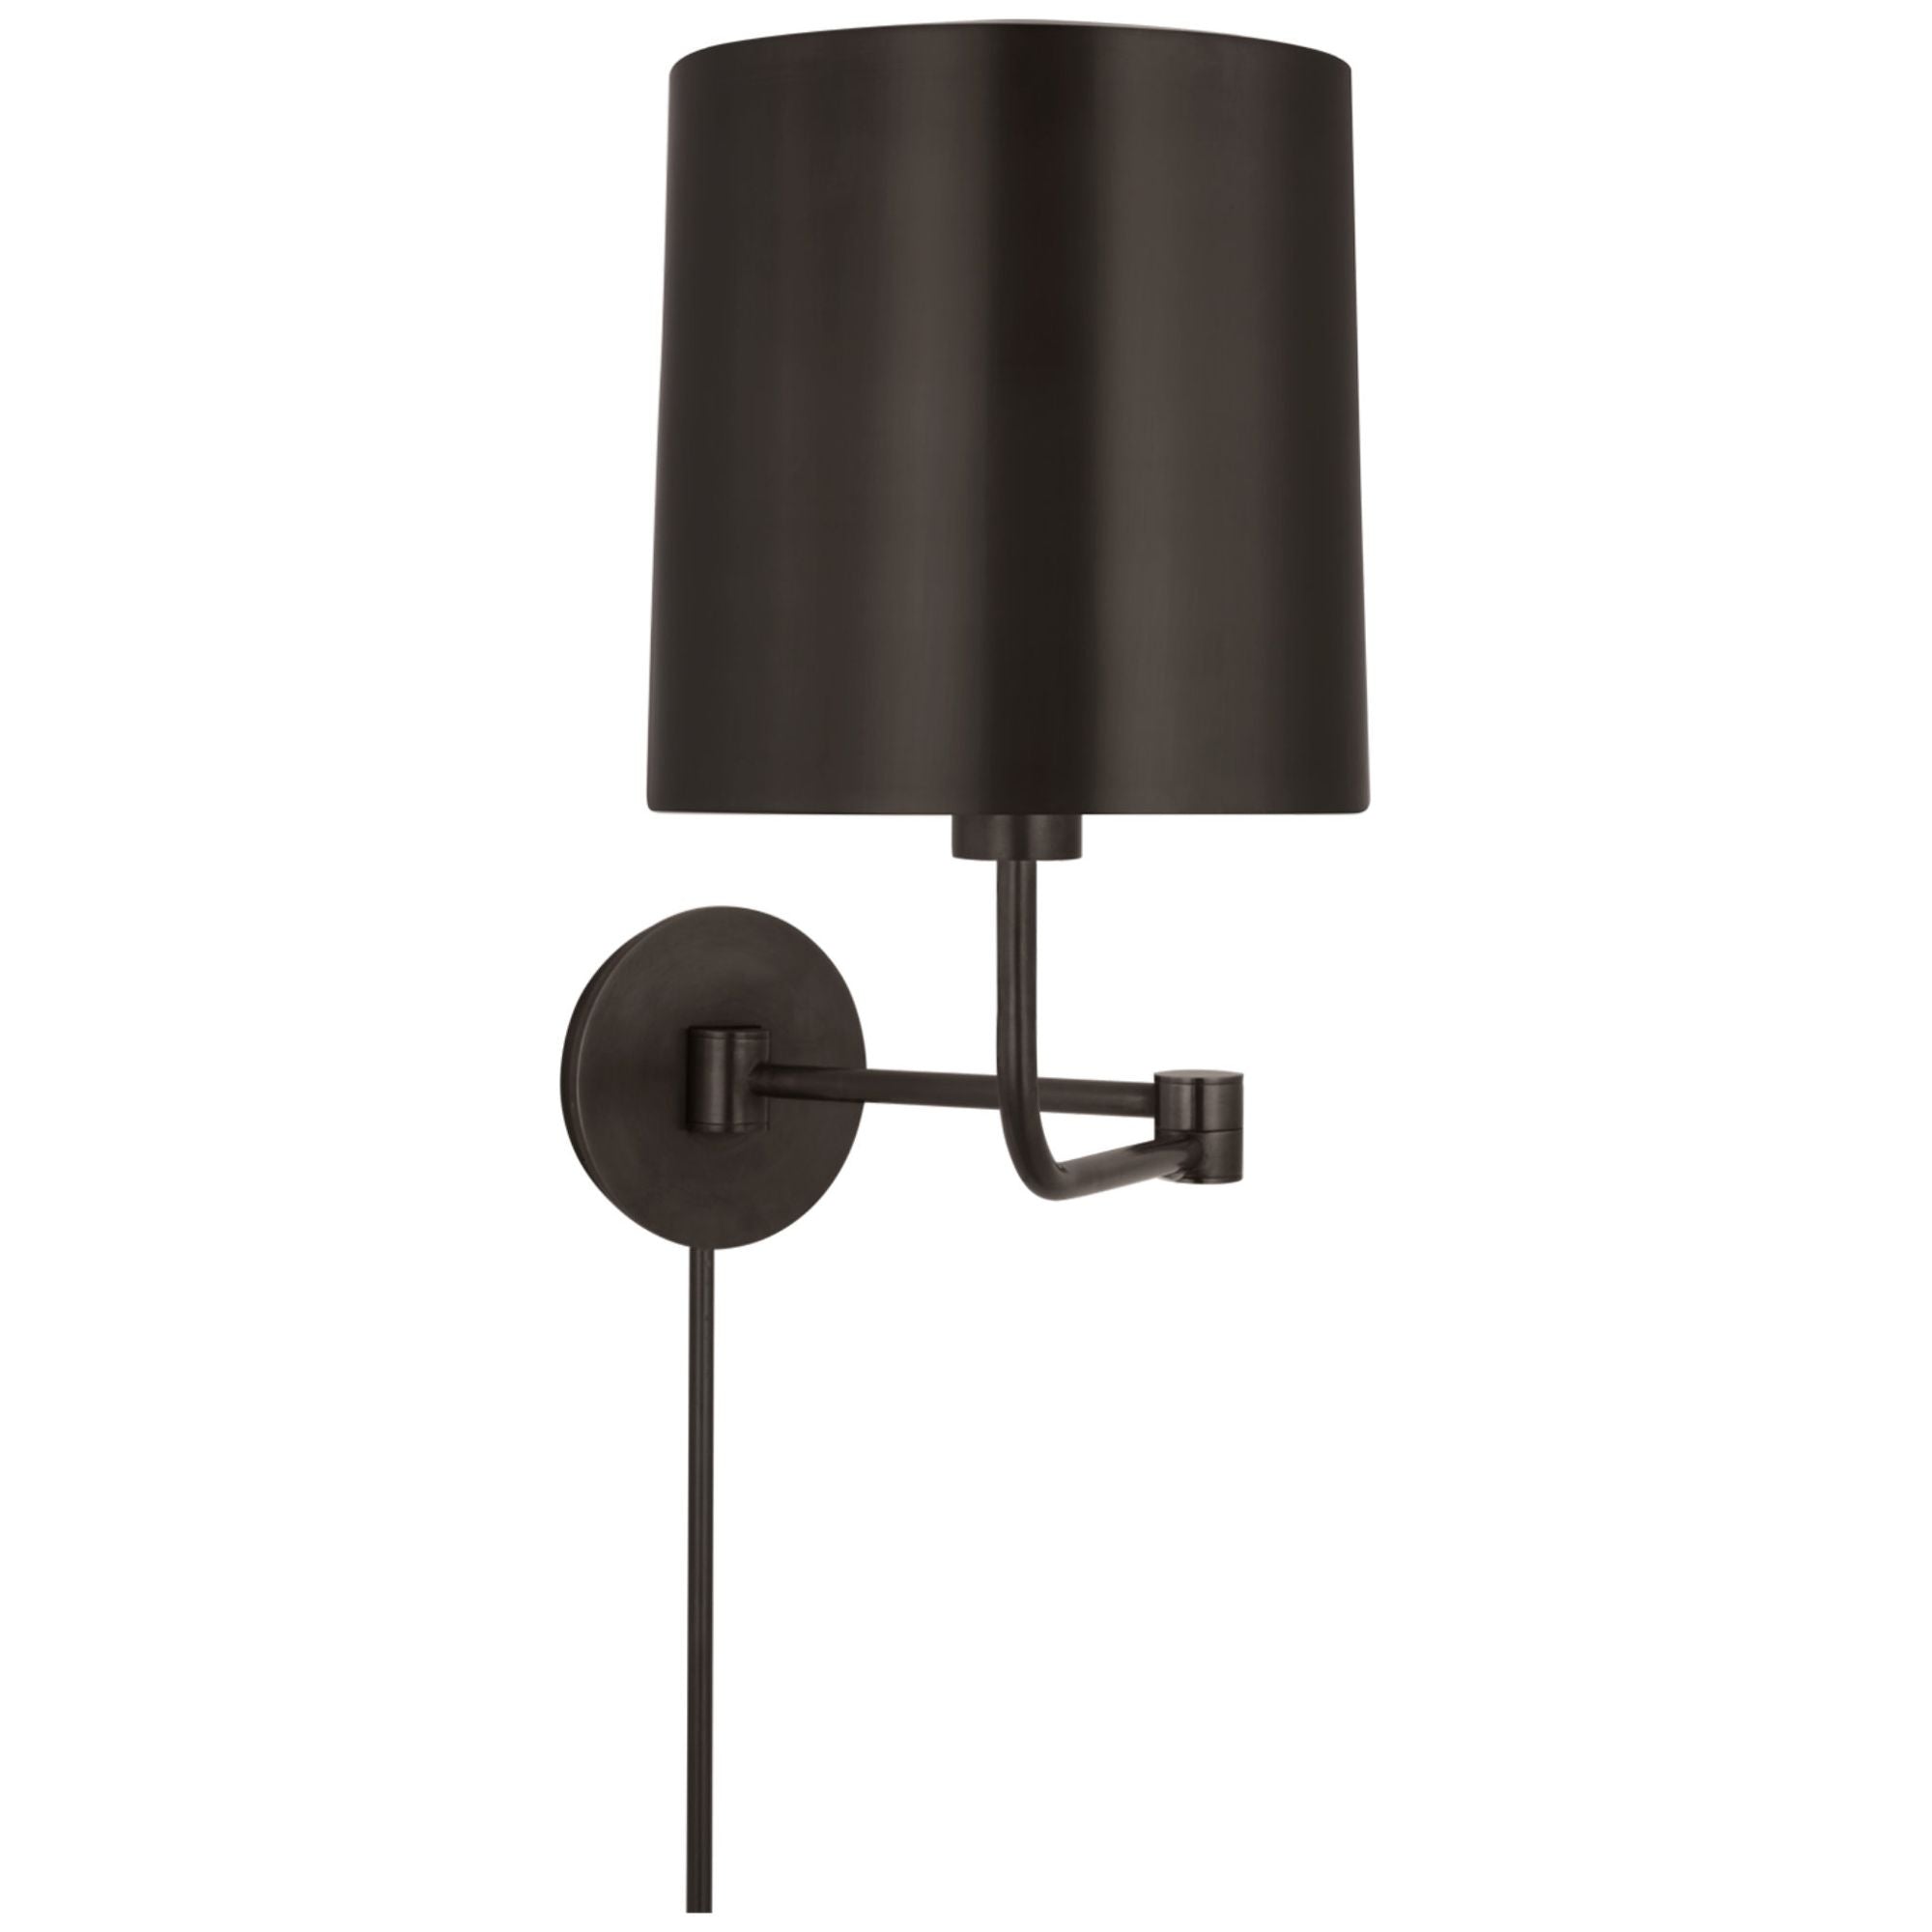 Barbara Barry Go Lightly Swing Arm Wall Light in Bronze with Bronze Shade